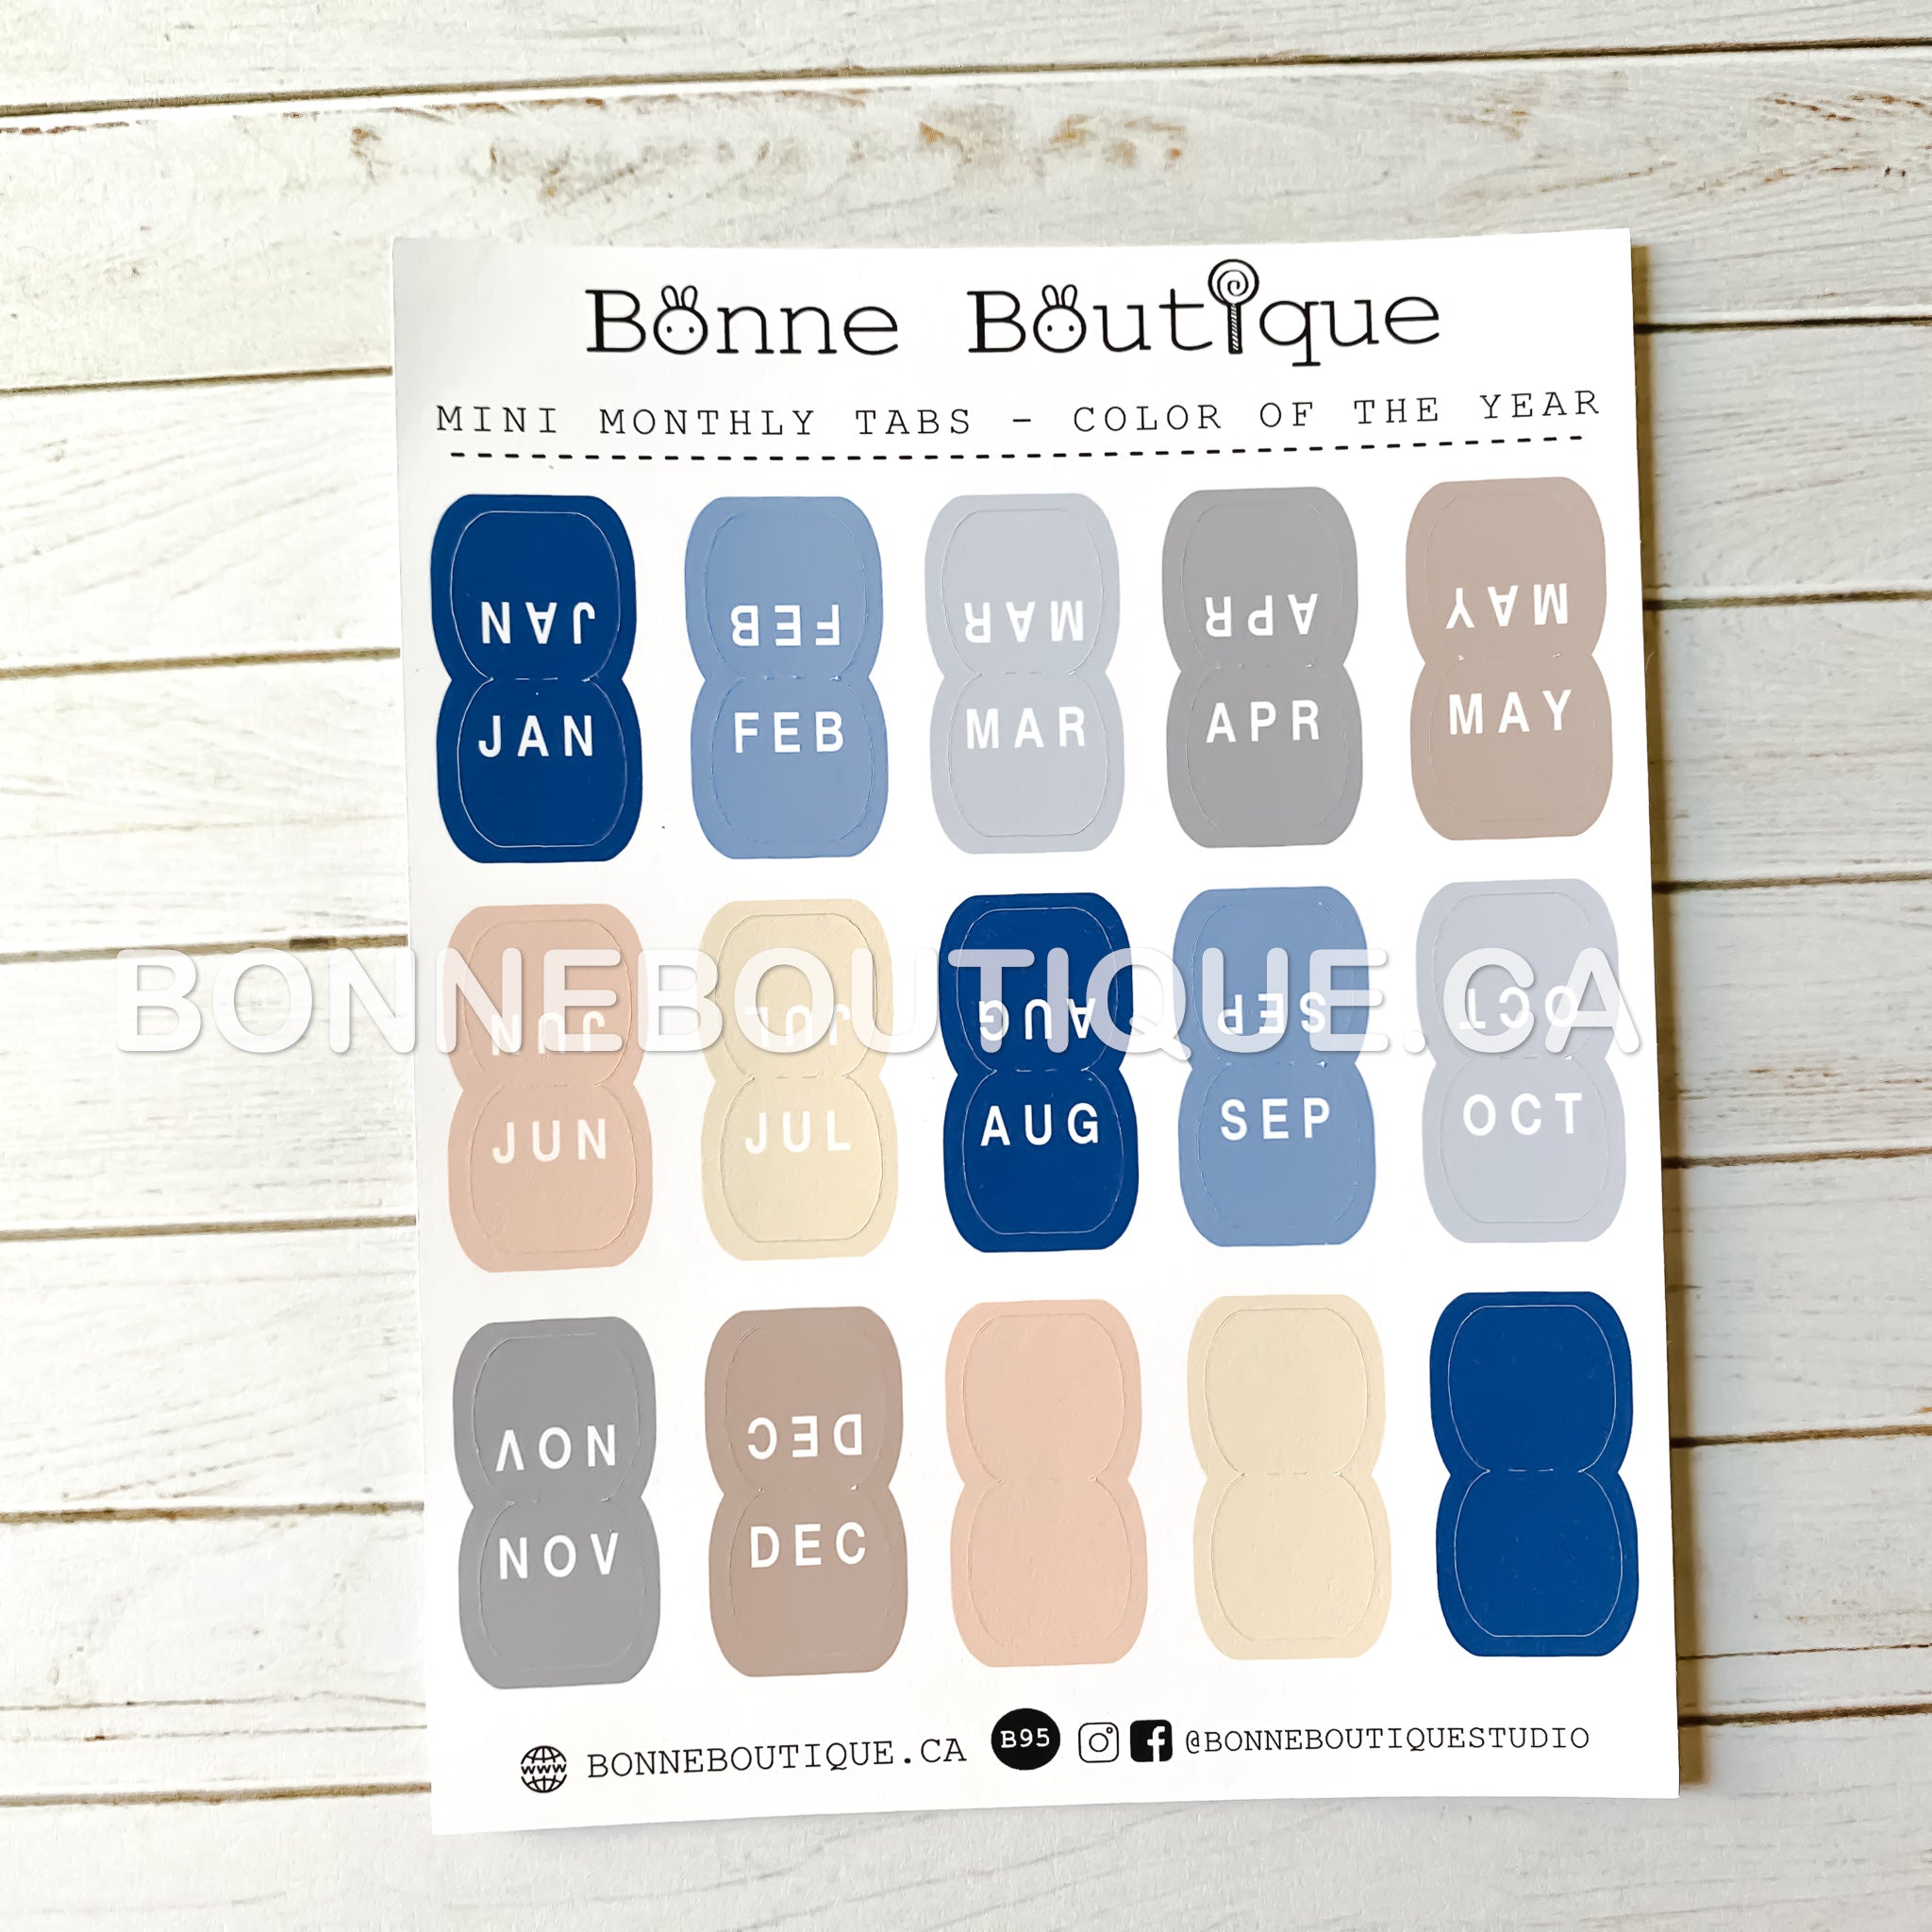 Mini Monthly Tabs Sticker Sheet 2020 Color of the Year - Classic Blue